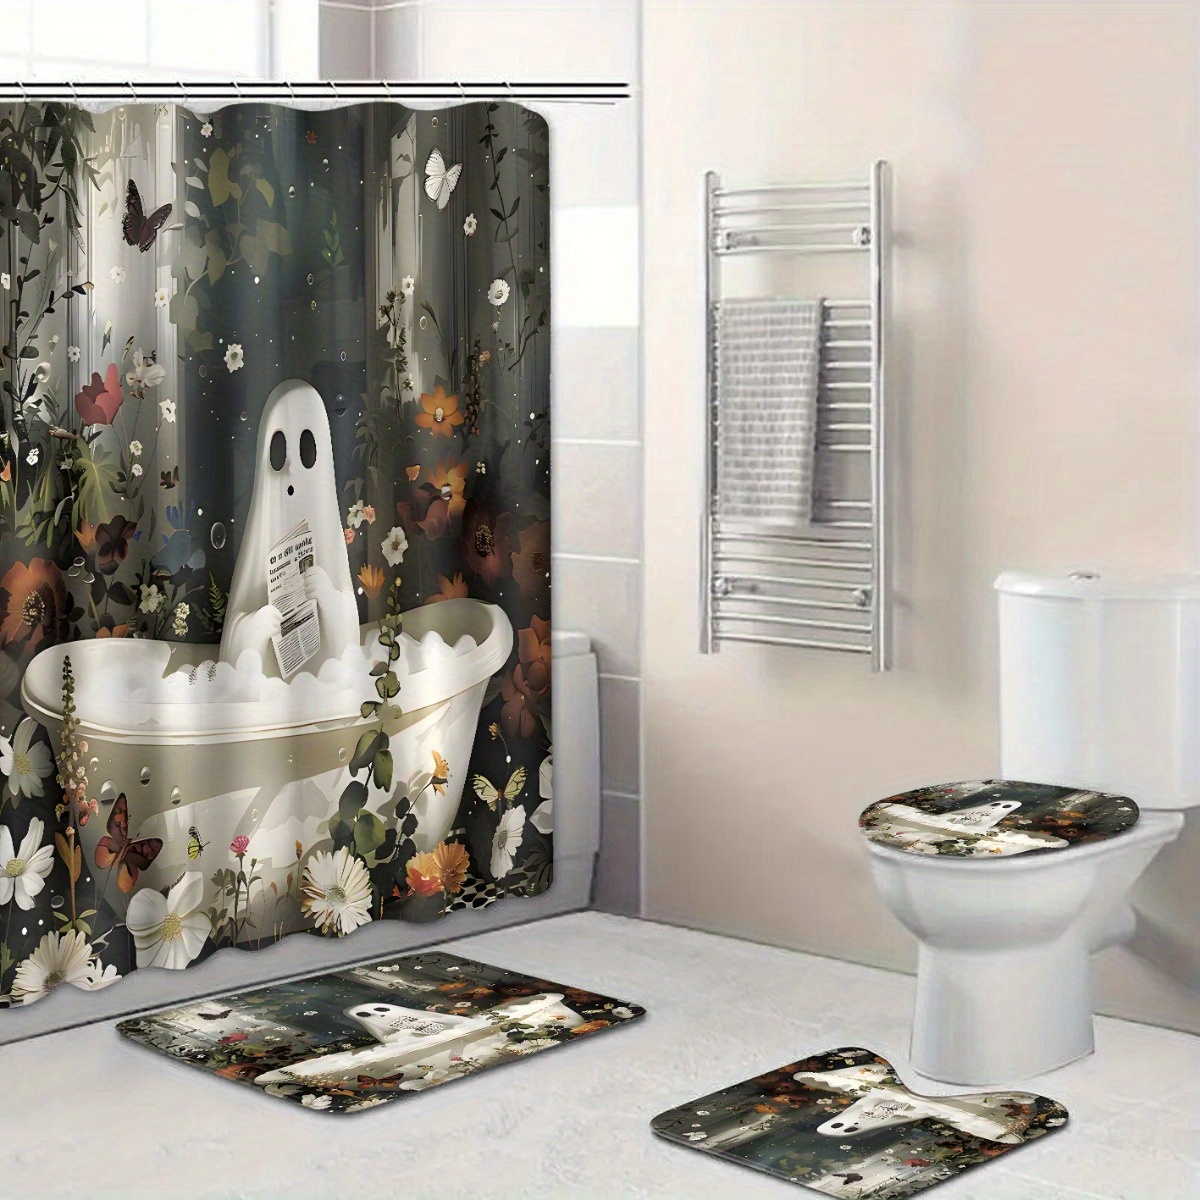 

Horror Chic Ghost Halloween Shower Curtain Set With Non-slip Rug, Toilet Lid Cover, Bath Mat - Woven Polyester Waterproof Bath Curtain With 12 Hooks - Decorative Ghostly Butterfly & Floral Design